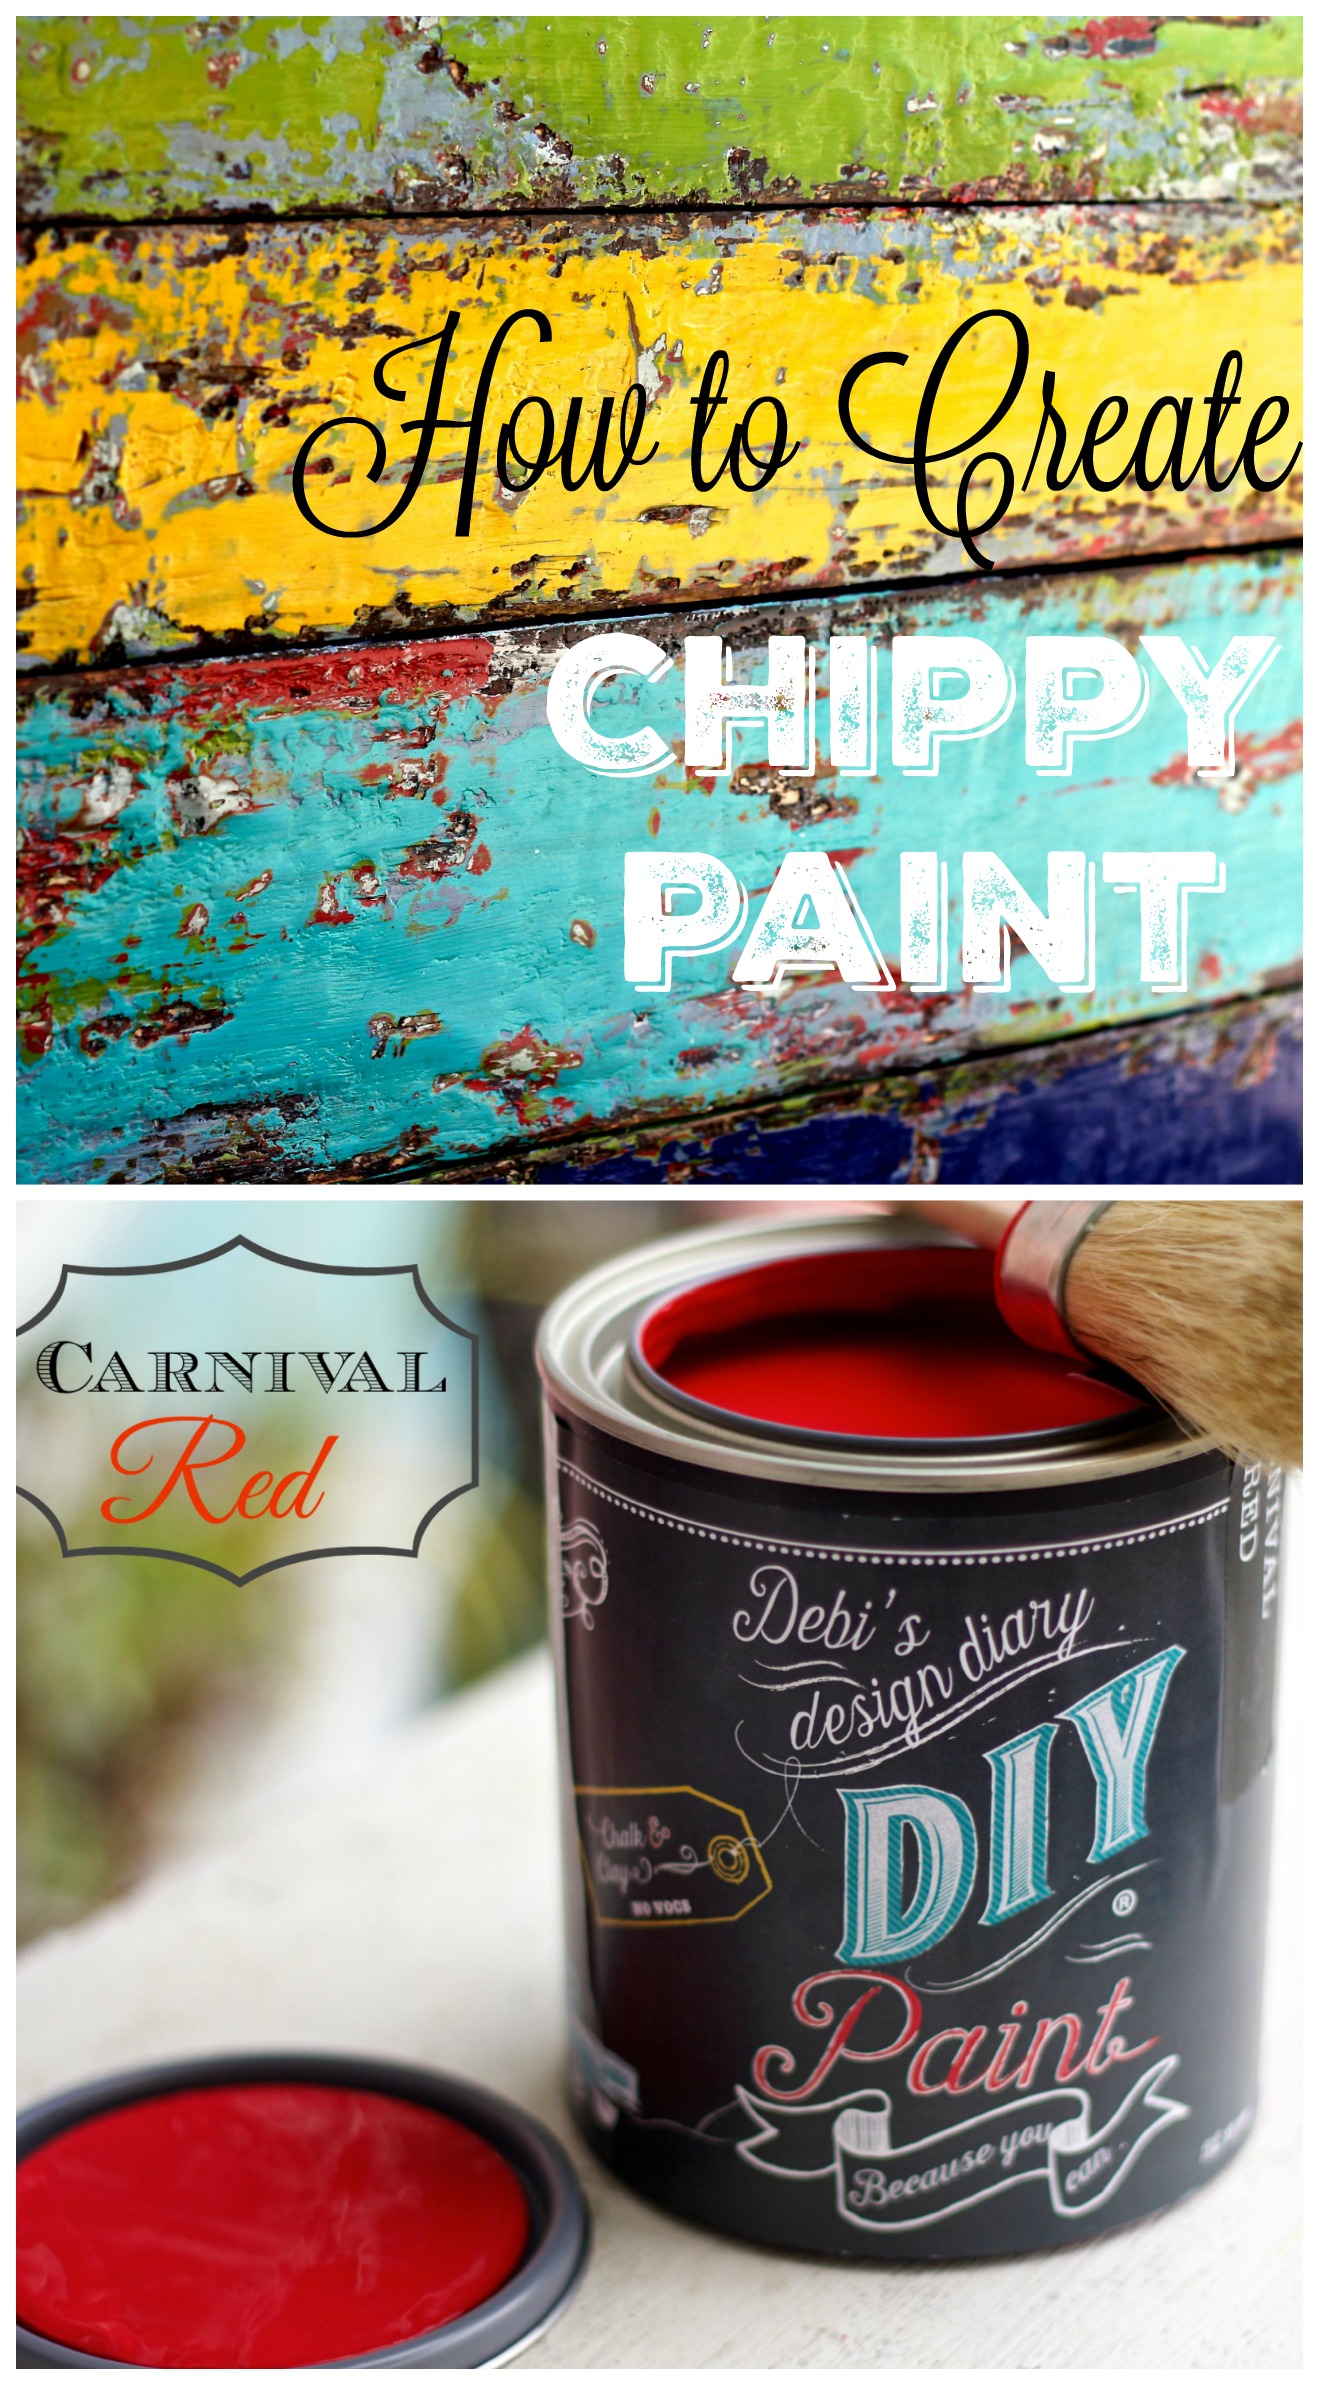 how to create chippy paint